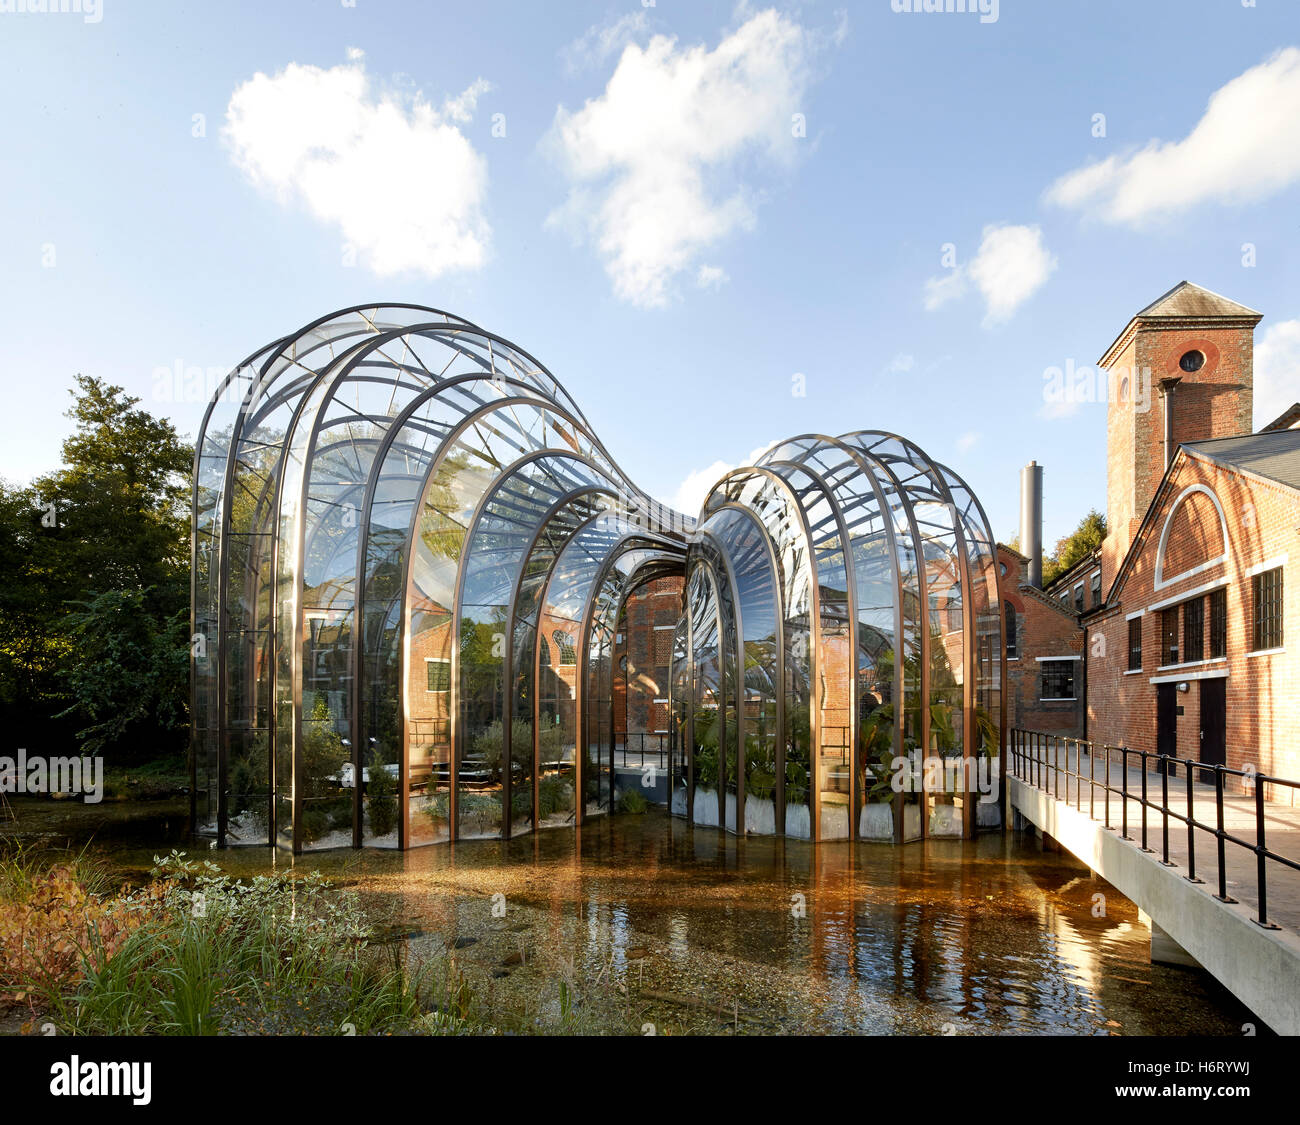 Historic mill site with curving greenhouse additions. Bombay Sapphire ...